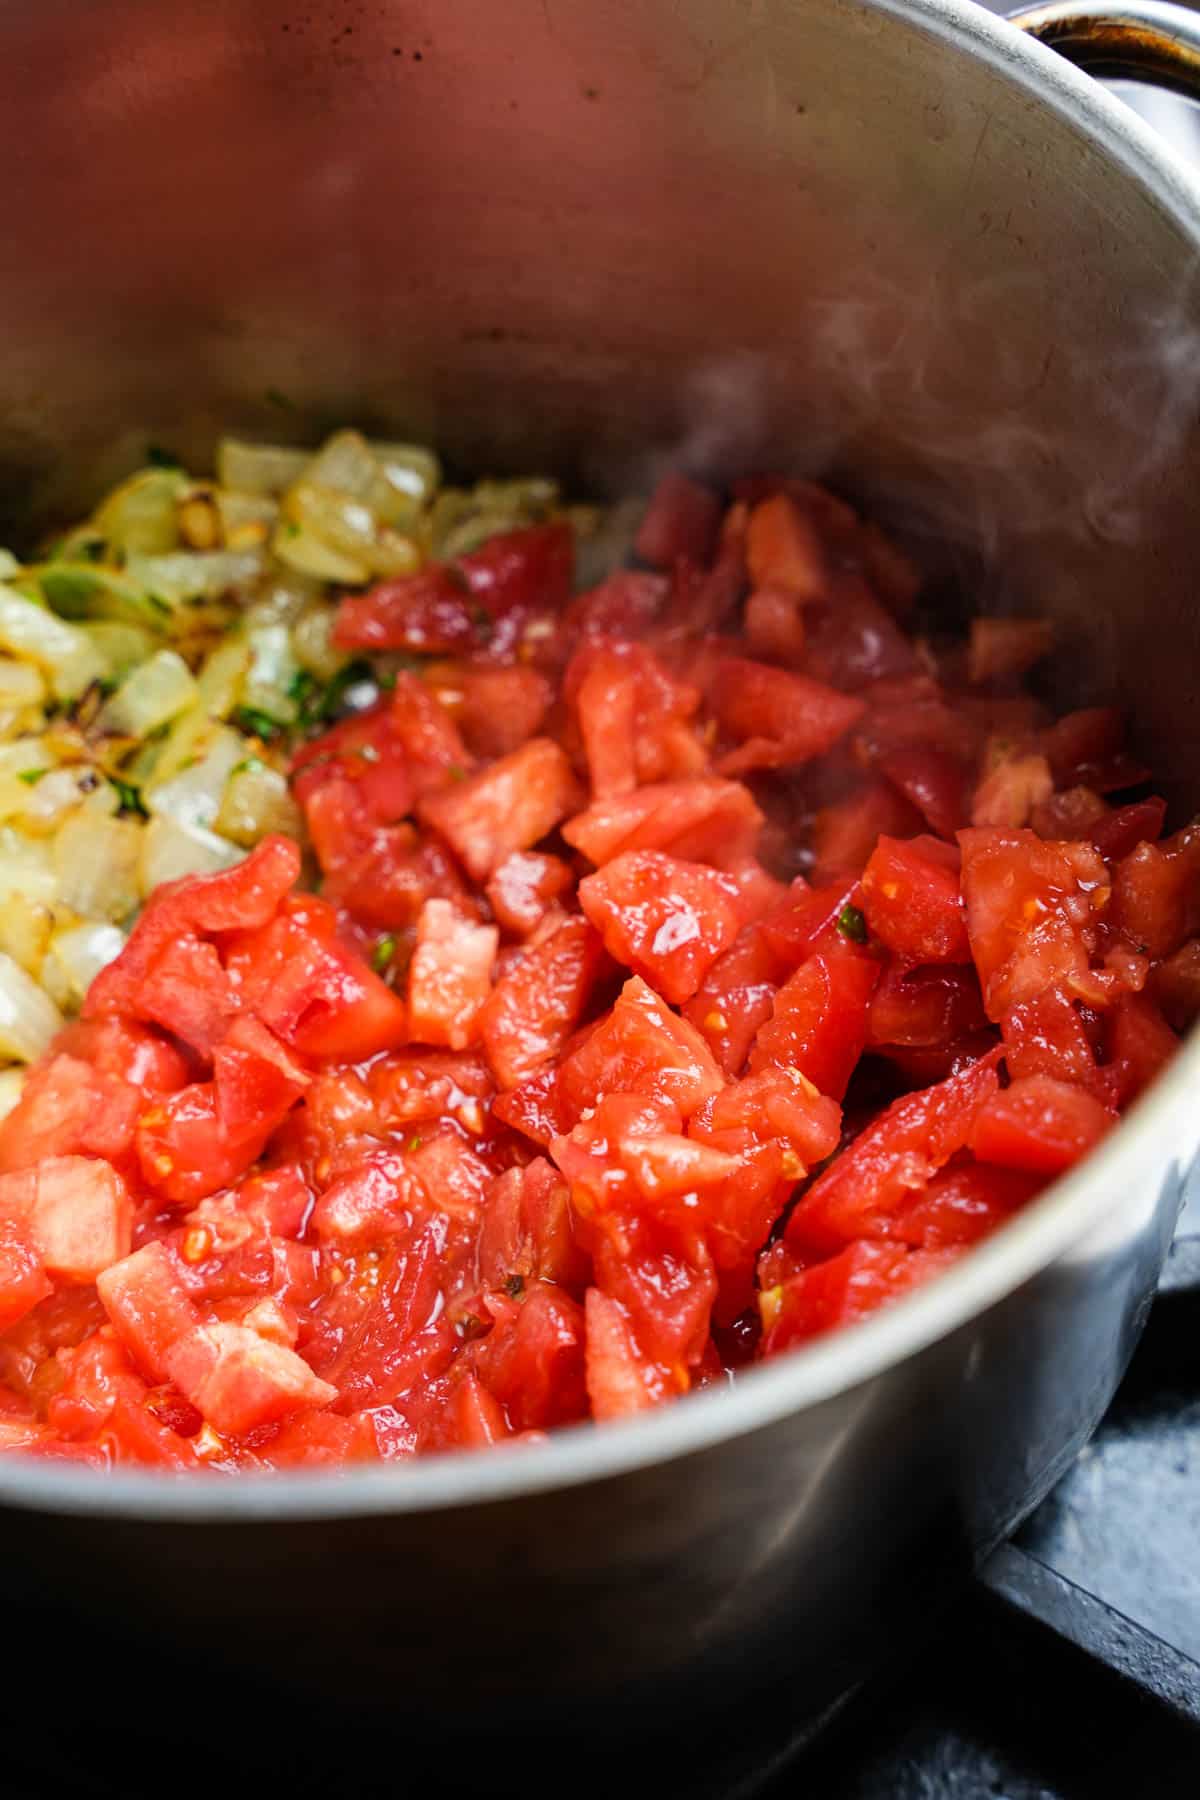 diced tomatoes are added to the cooking onions, garlic, and parsley in a stainless steel pot.